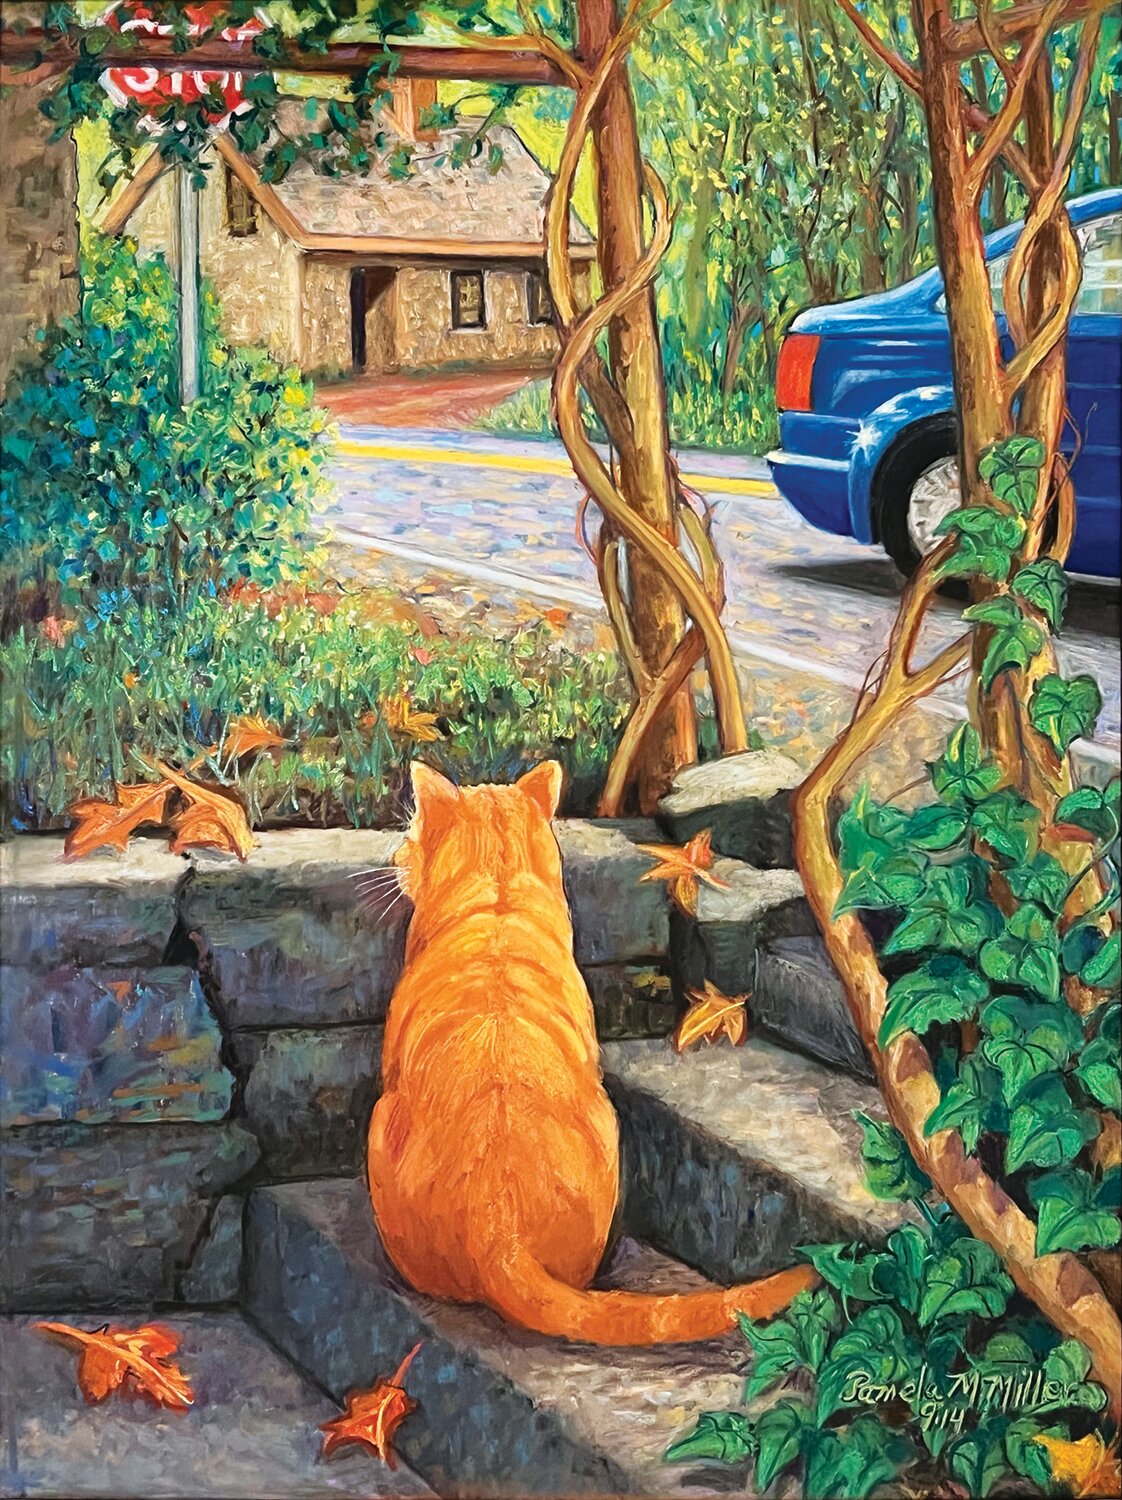 The 2023 Signature Image, “The Phillips’ Mill Party Cat,” is by Honored Artist Pamela Miller.